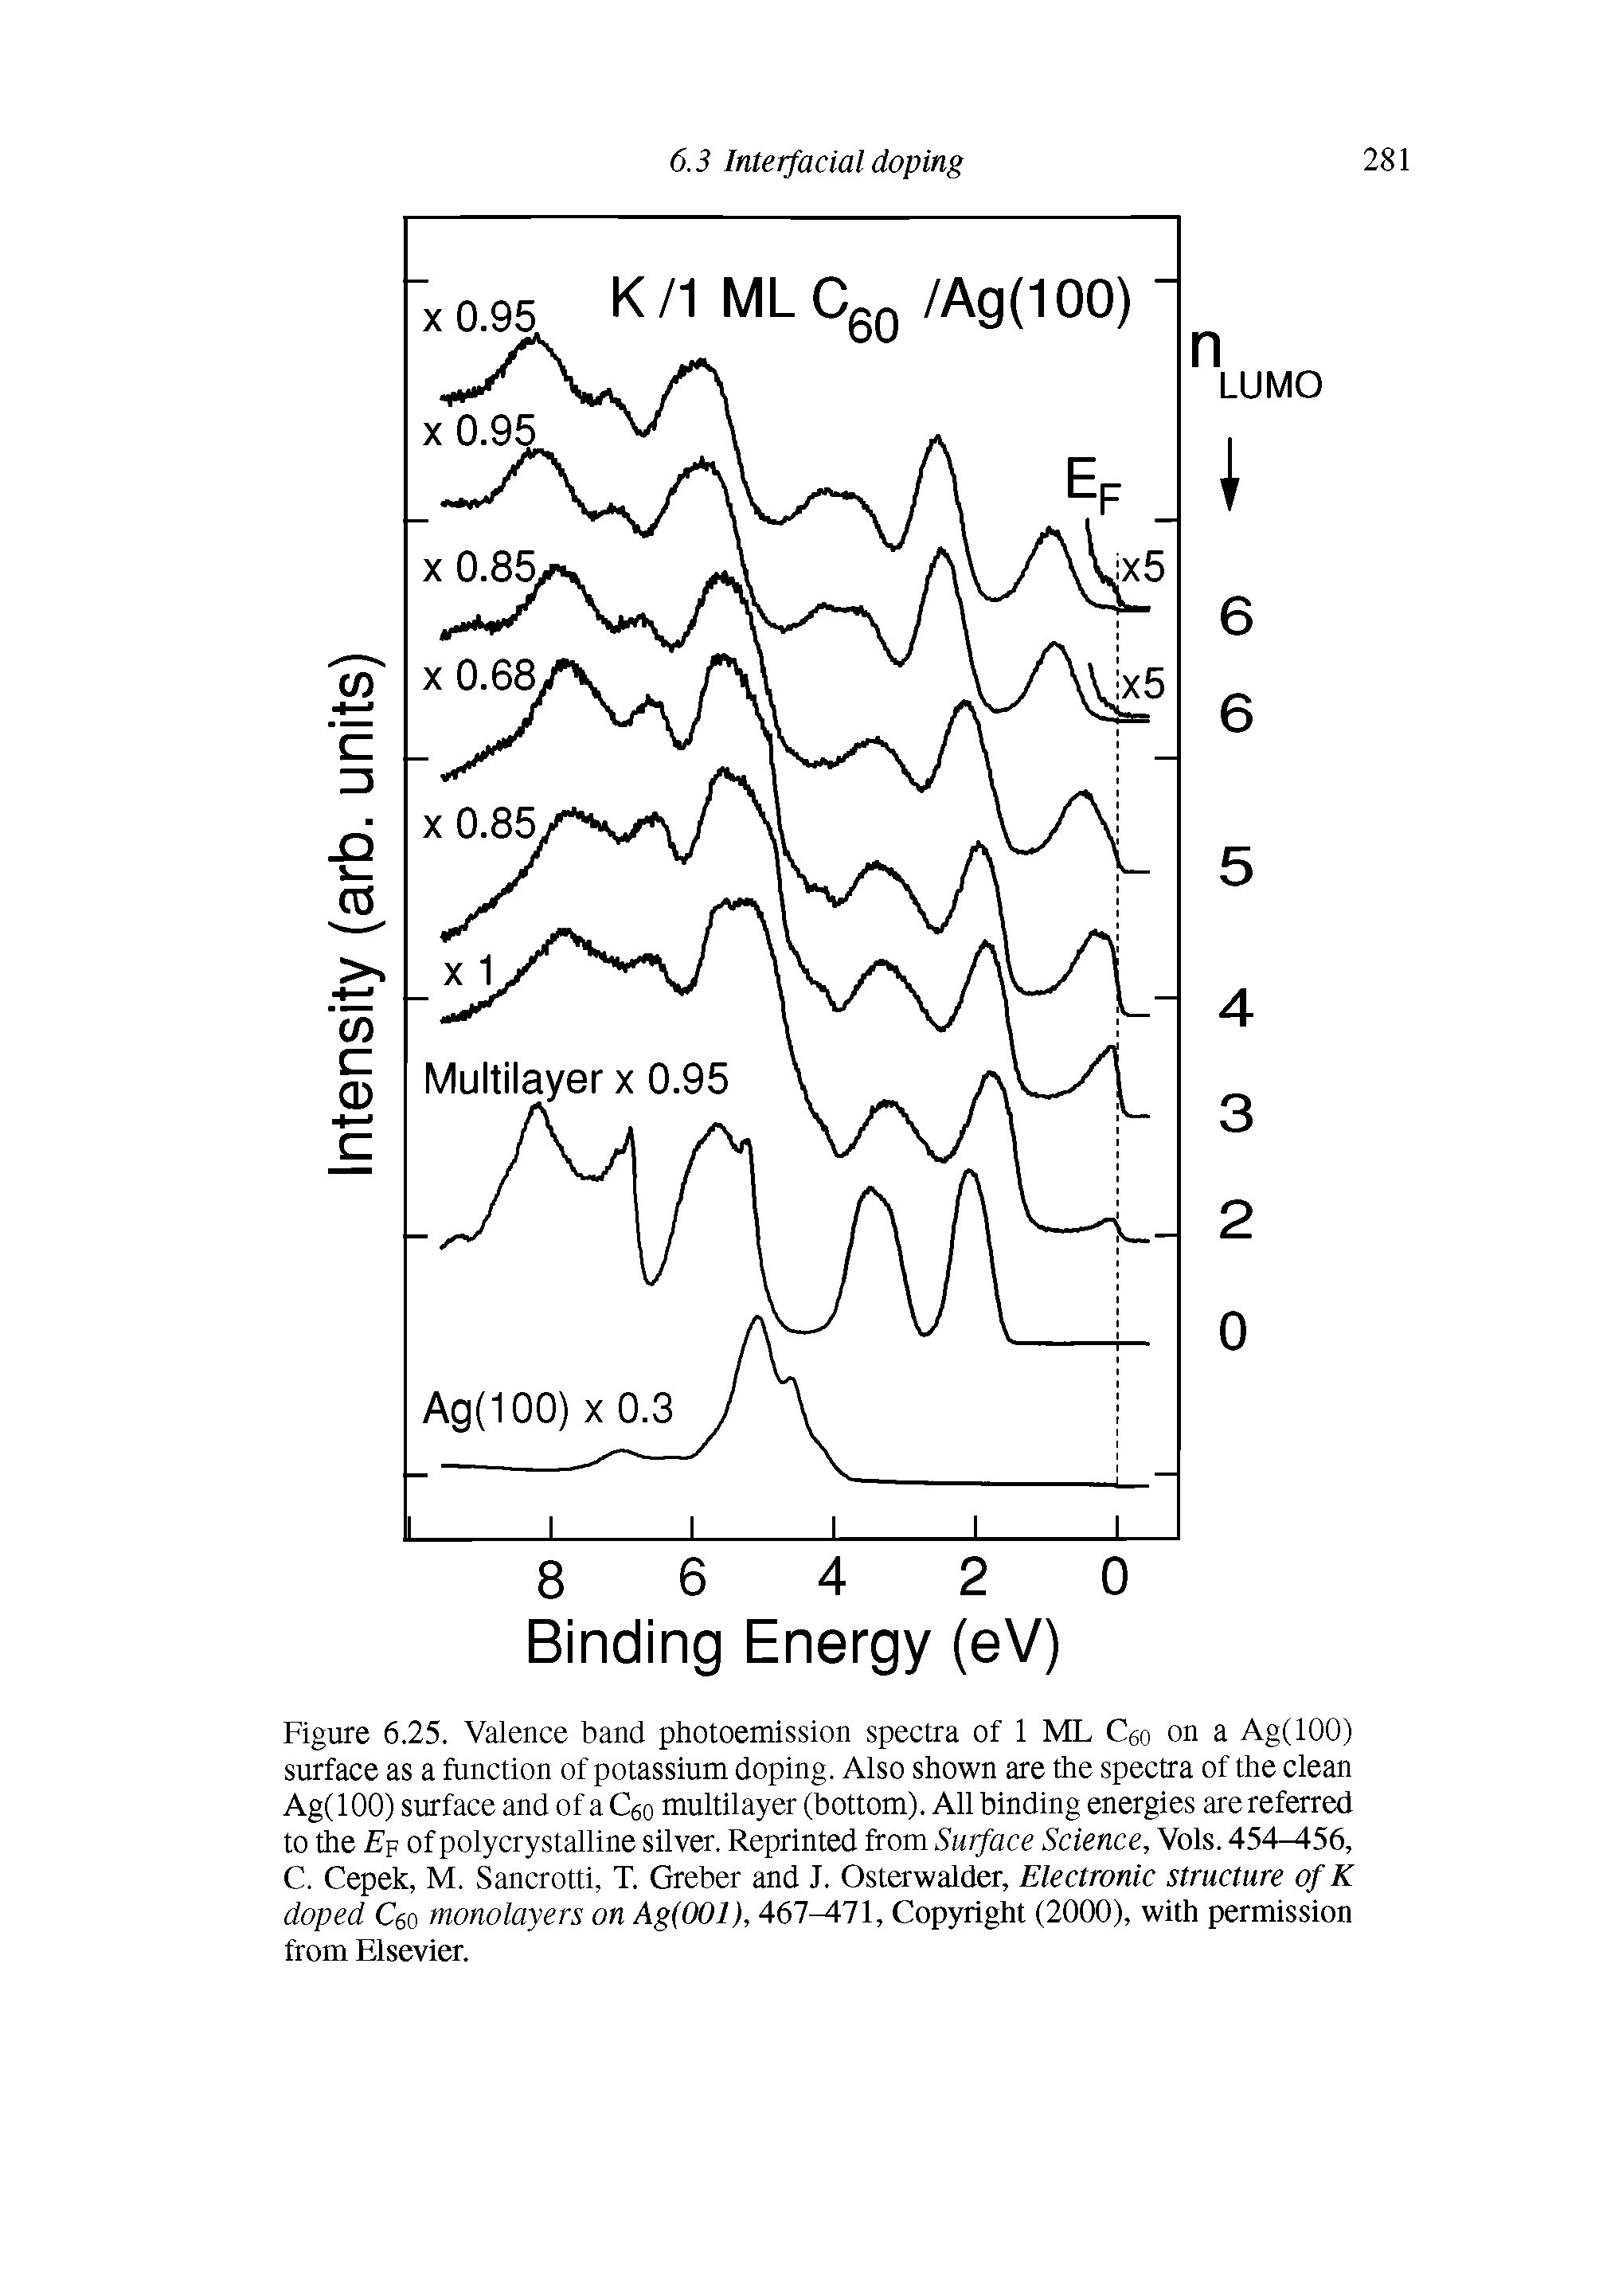 Figure 6.25. Valence band photoemission spectra of 1 ML Ceo on a Ag(lOO) surface as a function of potassium doping. Also shown are the spectra of the clean Ag(lOO) surface and of a Ceo multilayer (bottom). All binding energies are referred to the L f of polycrystalline silver. Reprinted from Surface Science, Vols. 454-456, C. Cepek, M. Sancrotti, T. Greber and J. Osterwalder, Electronic structure of K doped Ceo monolayers on Ag(OOl), 467 71, Copyright (2000), with permission from Elsevier.